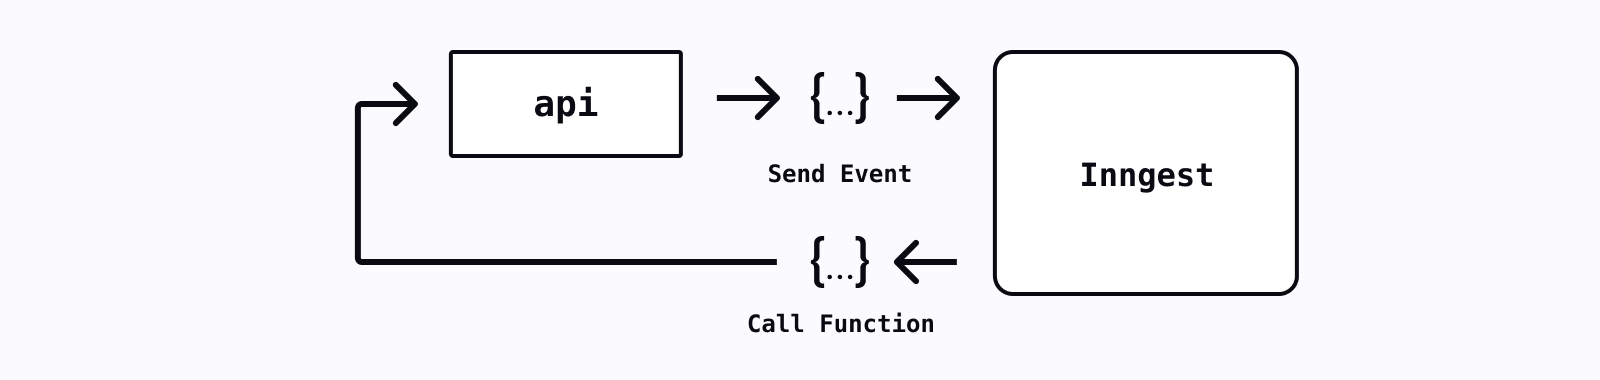 Graphic of an API, Inngest, an event being sent and then a function being called via HTTP